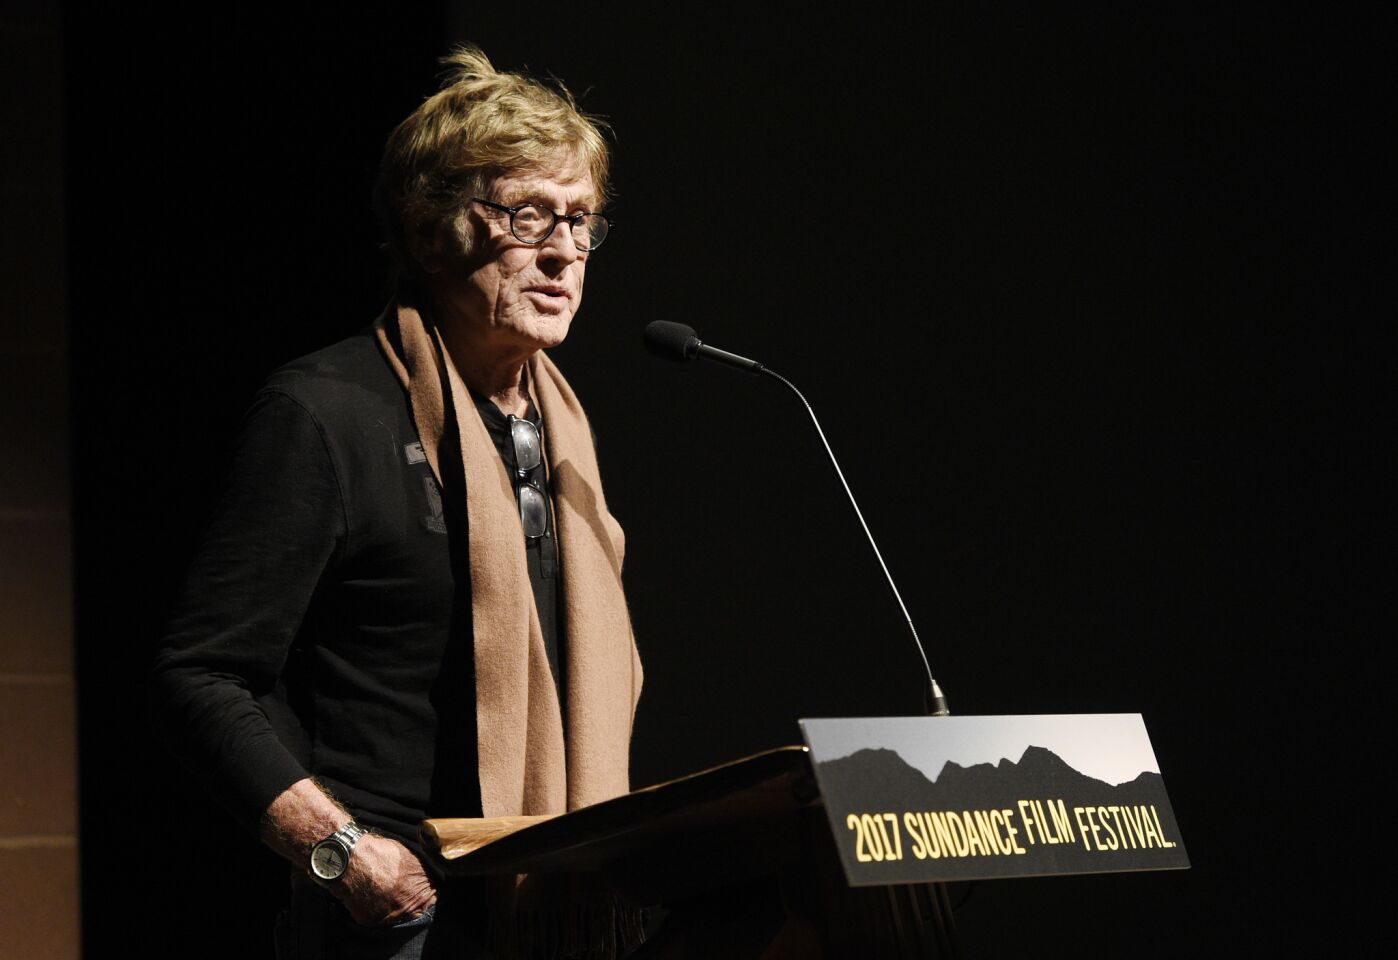 Robert Redford, founder of the Sundance Institute, addresses the audience at the opening night premiere of the film "An Inconvenient Sequel: Truth to Power," at the Eccles Theater.